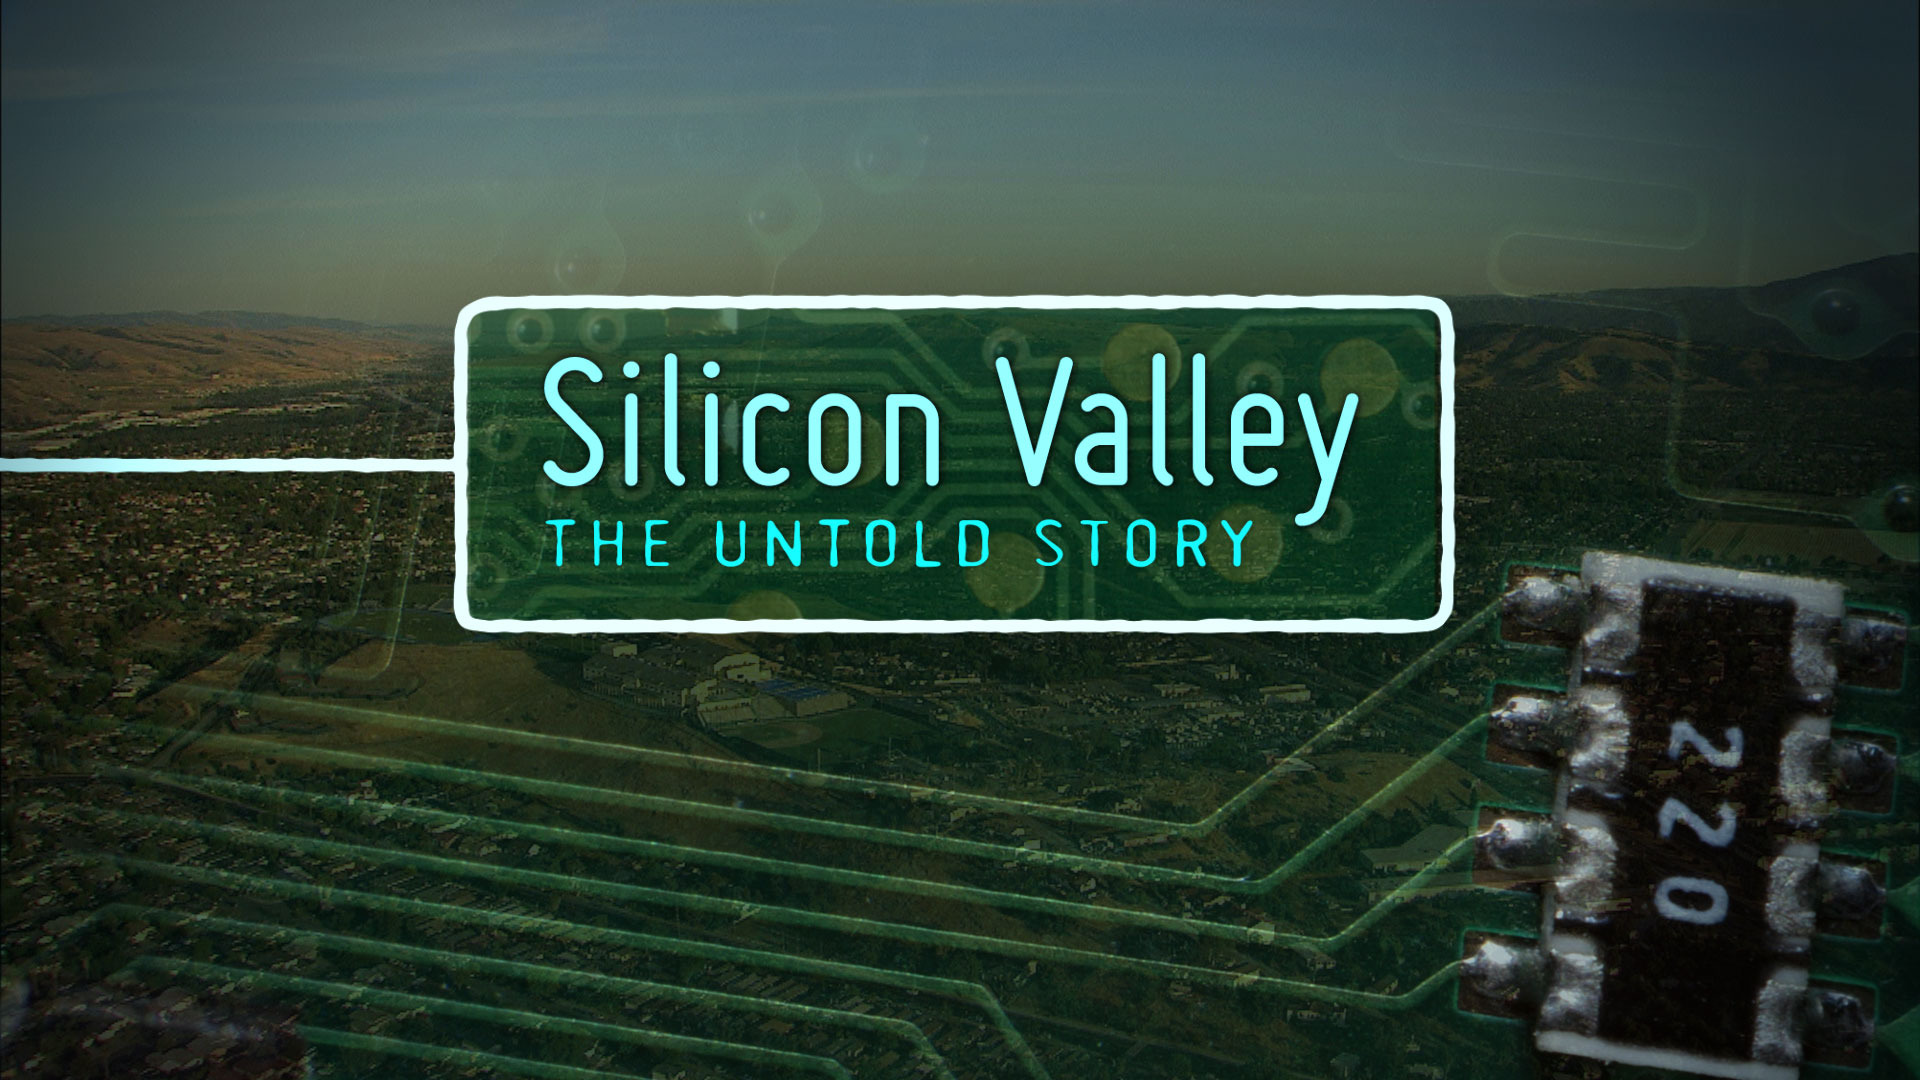 Show Silicon Valley: The Untold Story